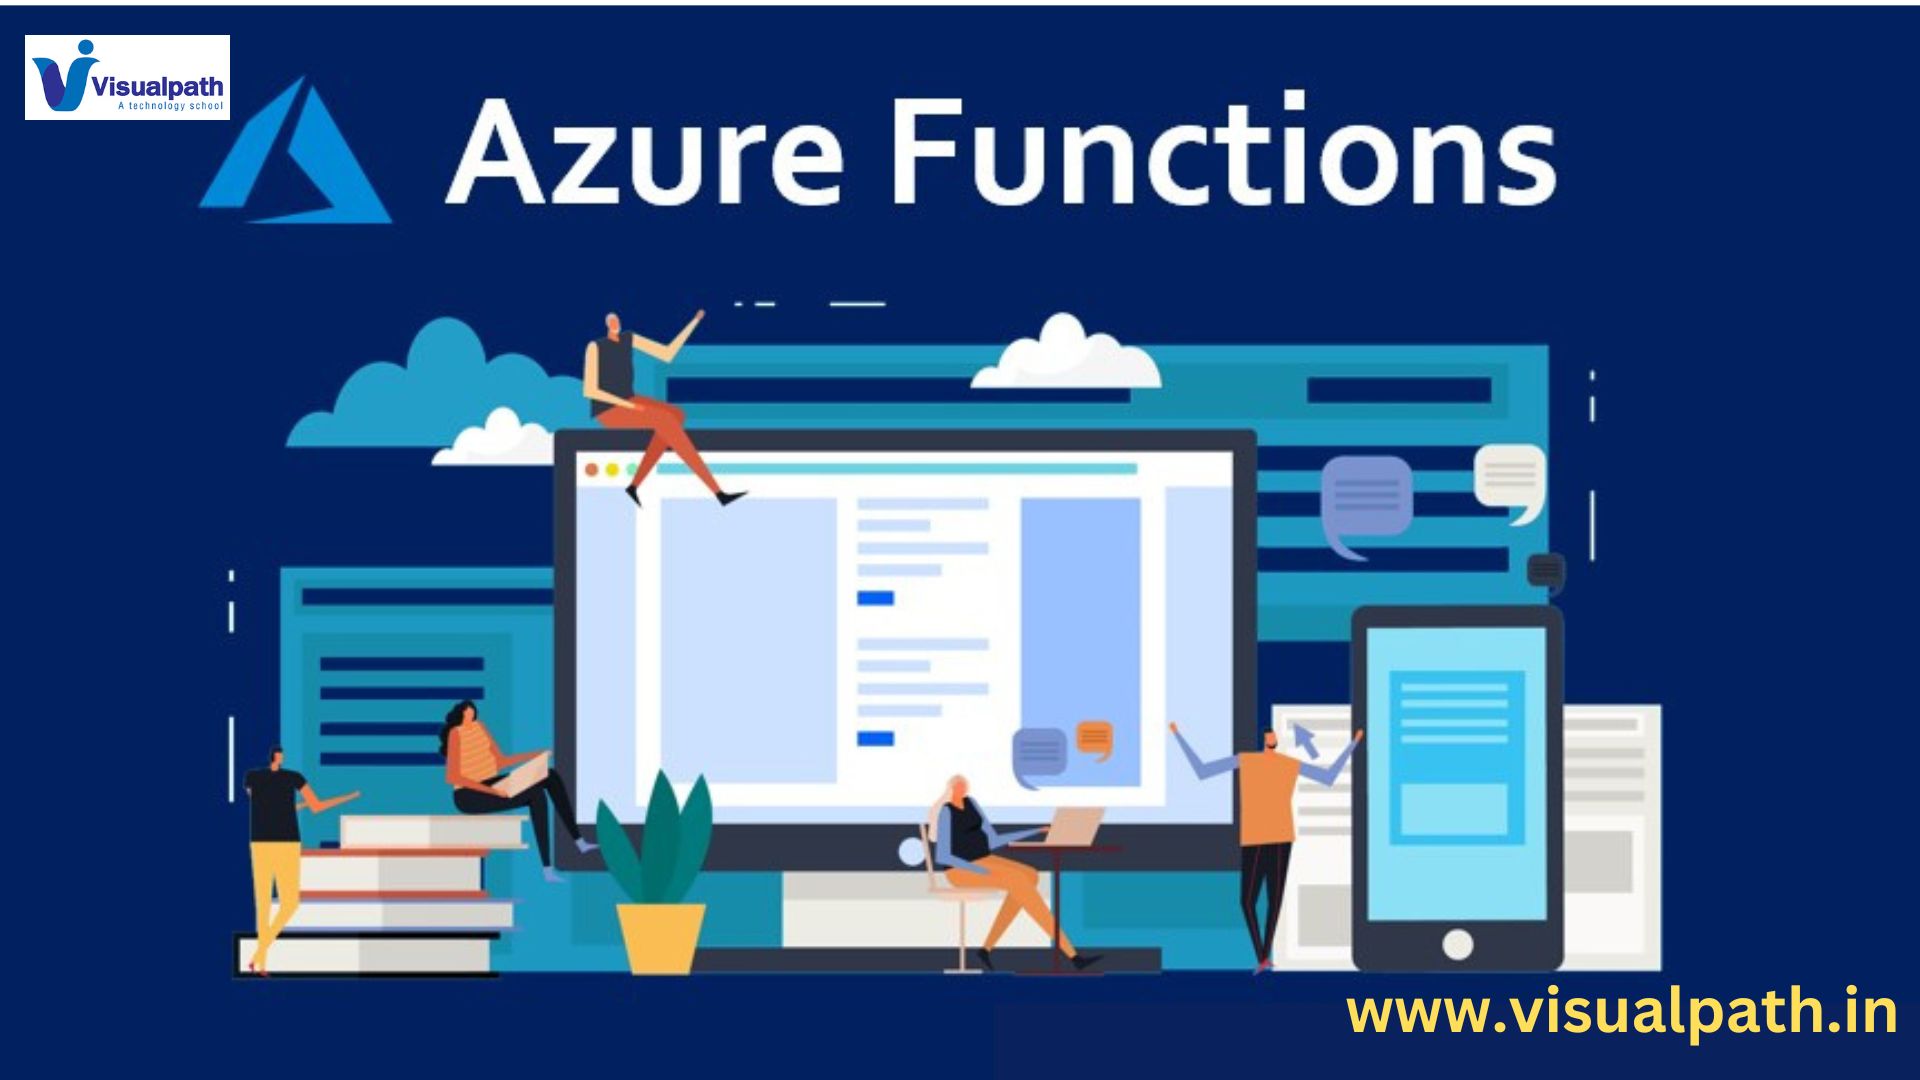 What is Microsoft Azure Functions?